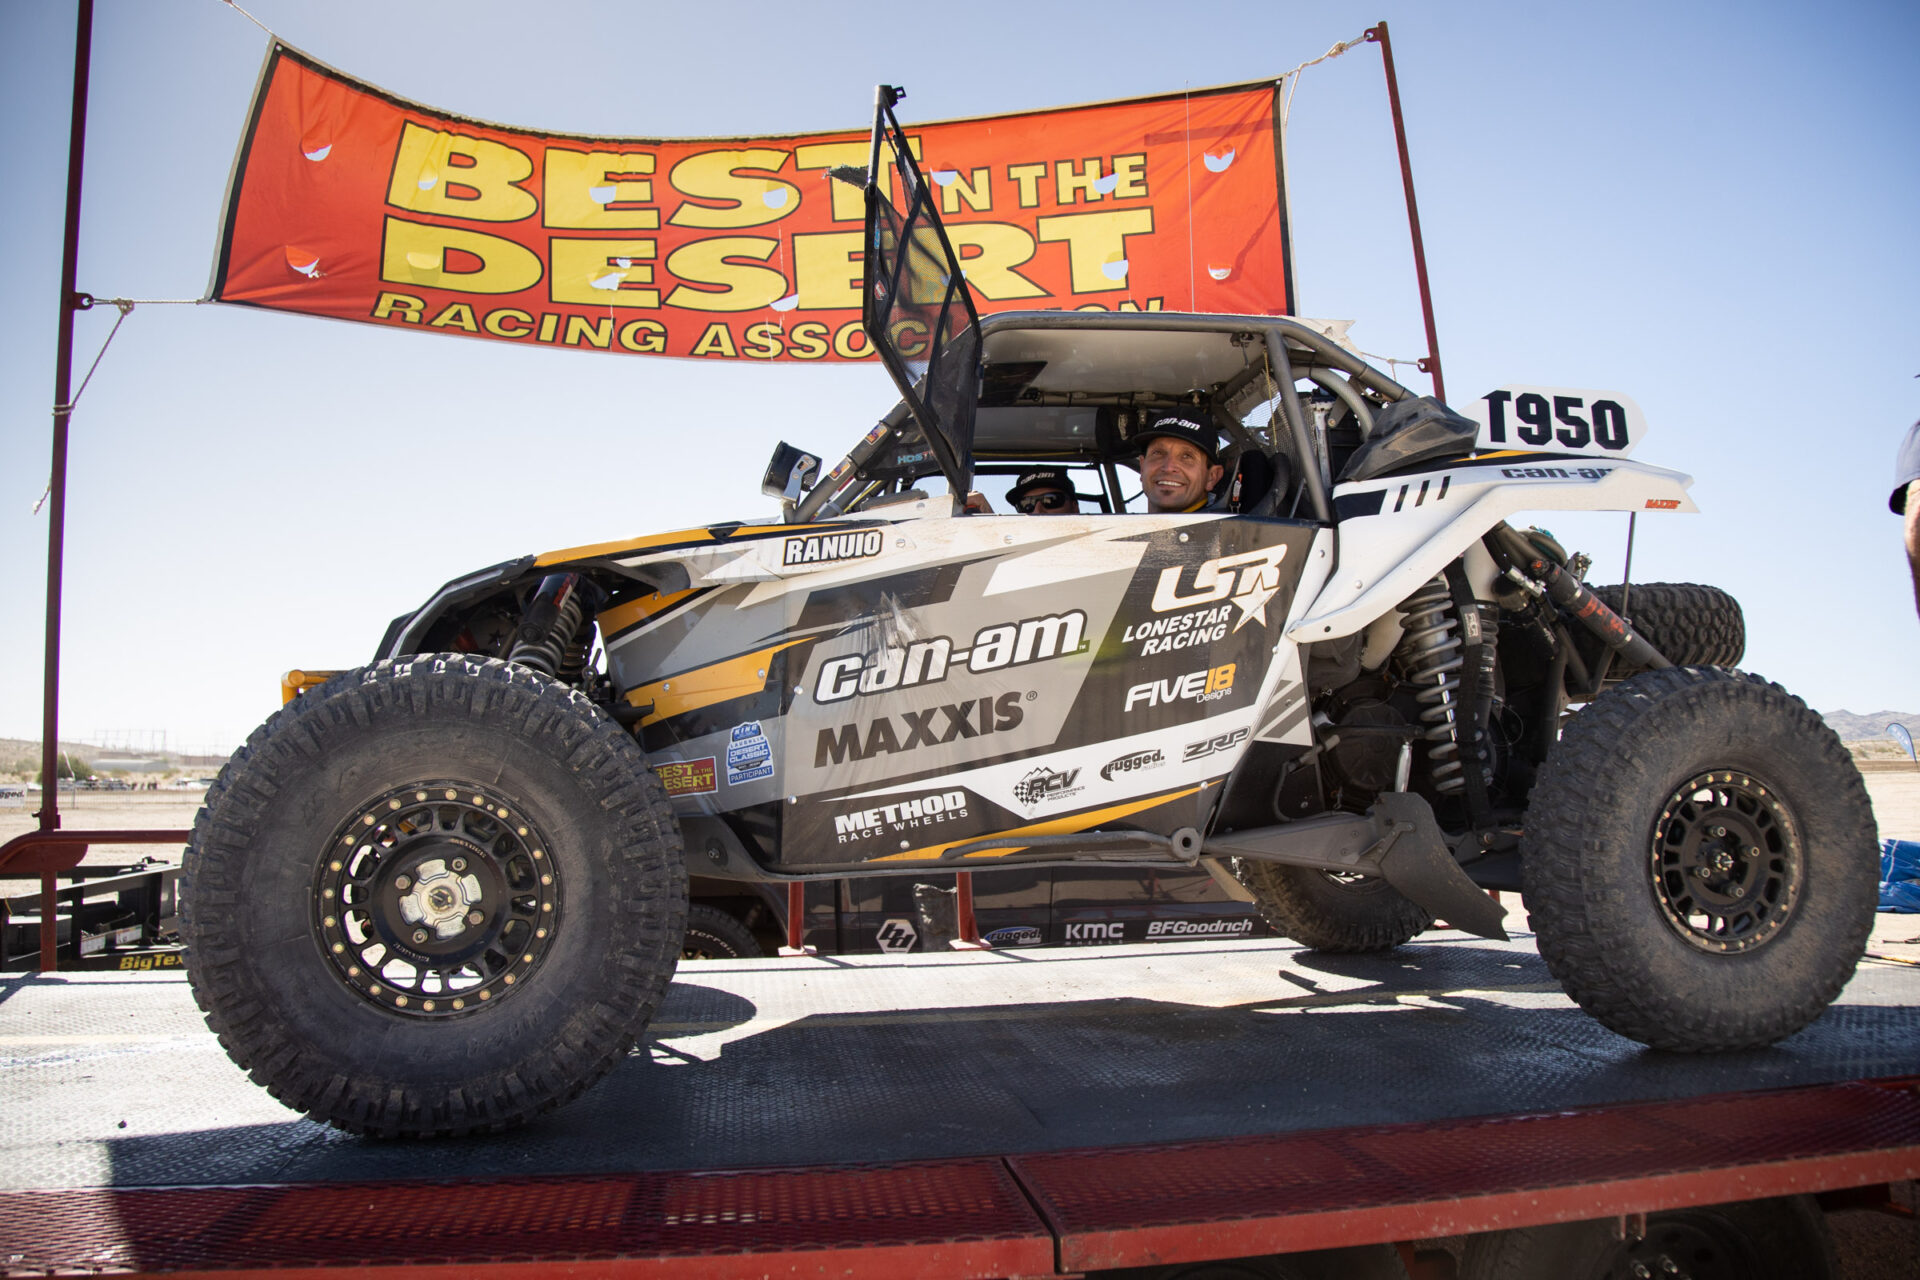 Maxxis rider Ranuio Jones Take First, Second Saturday at Best in the Desert Laughlin Desert Classic seen here in his CAN-AM UTV vehicle outfitted with Maxxis RAZR XT tires.